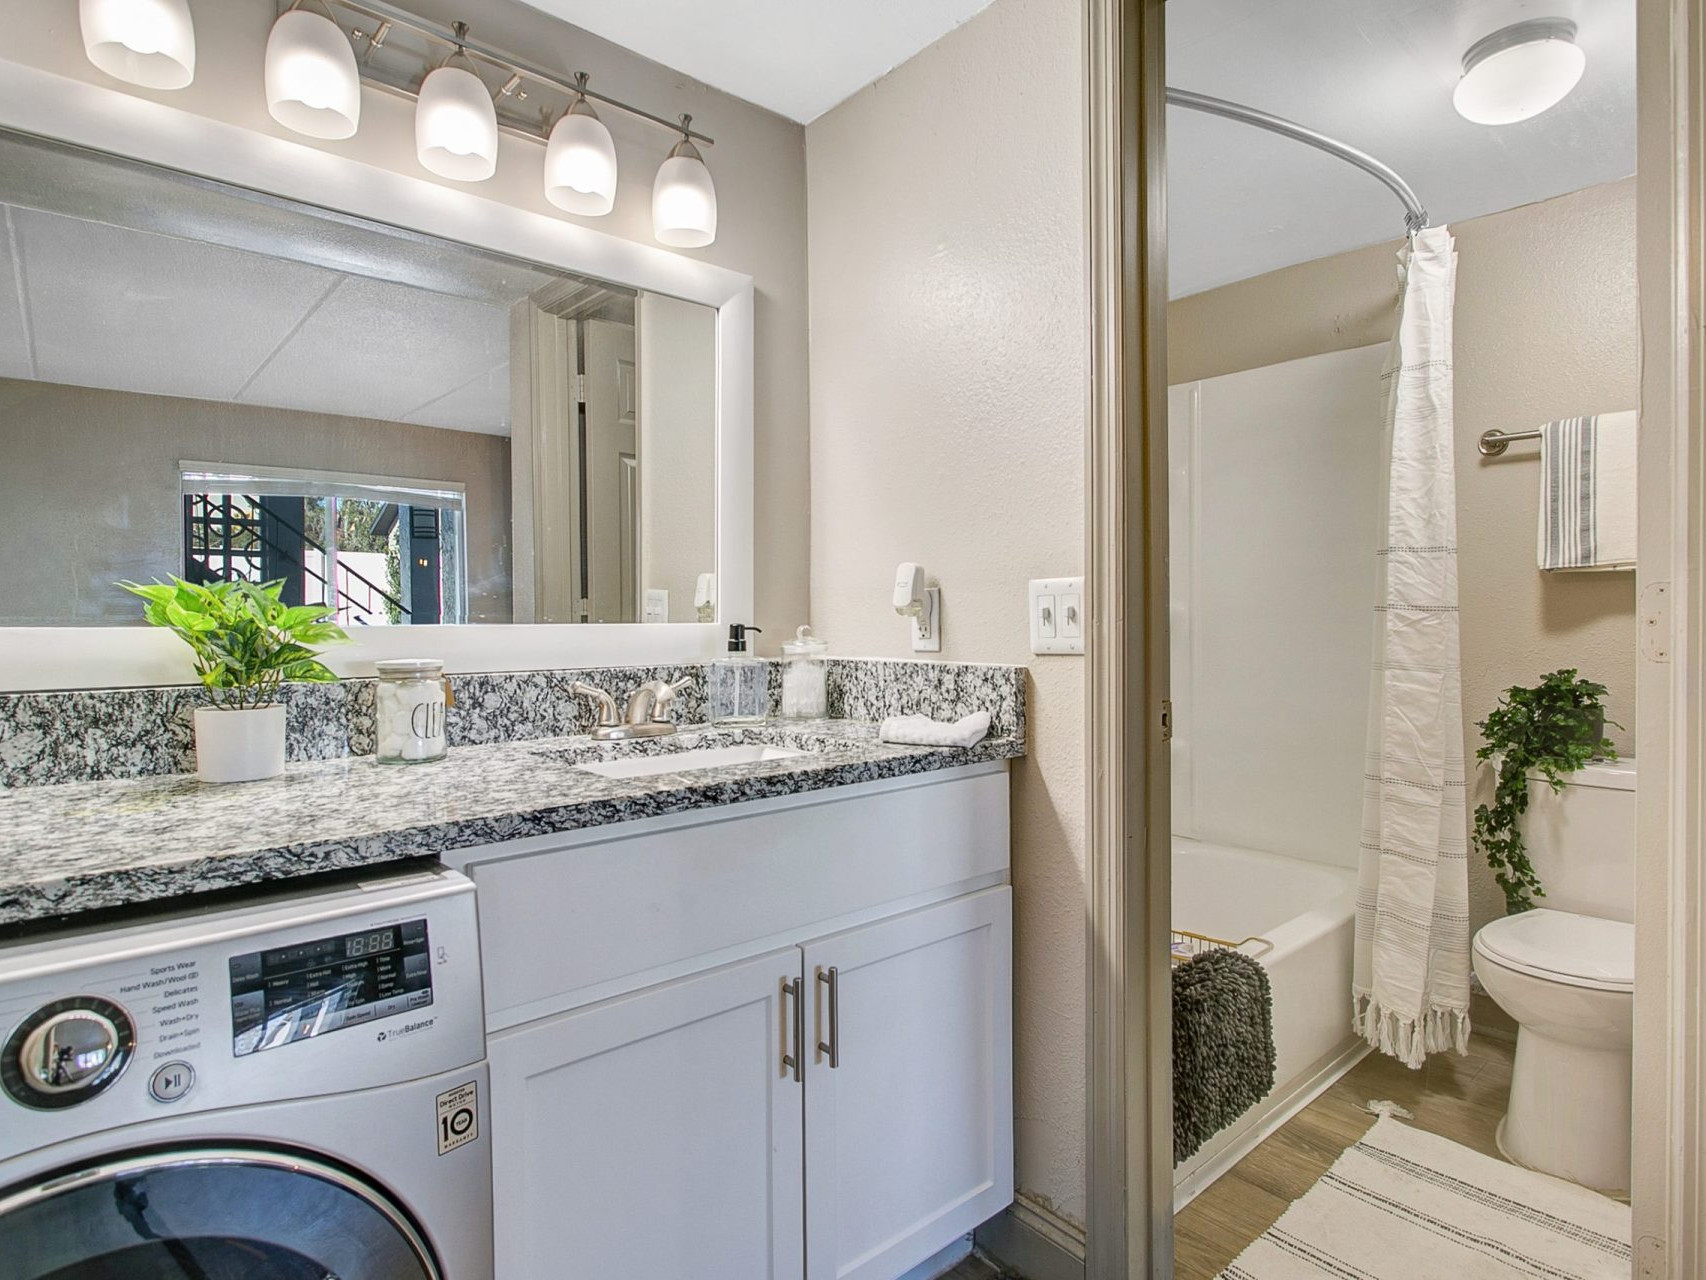 A bathroom with a large counter and mirror, under-the-sink washer and dryer, and sliding door with access to the shower/tub and toilet.